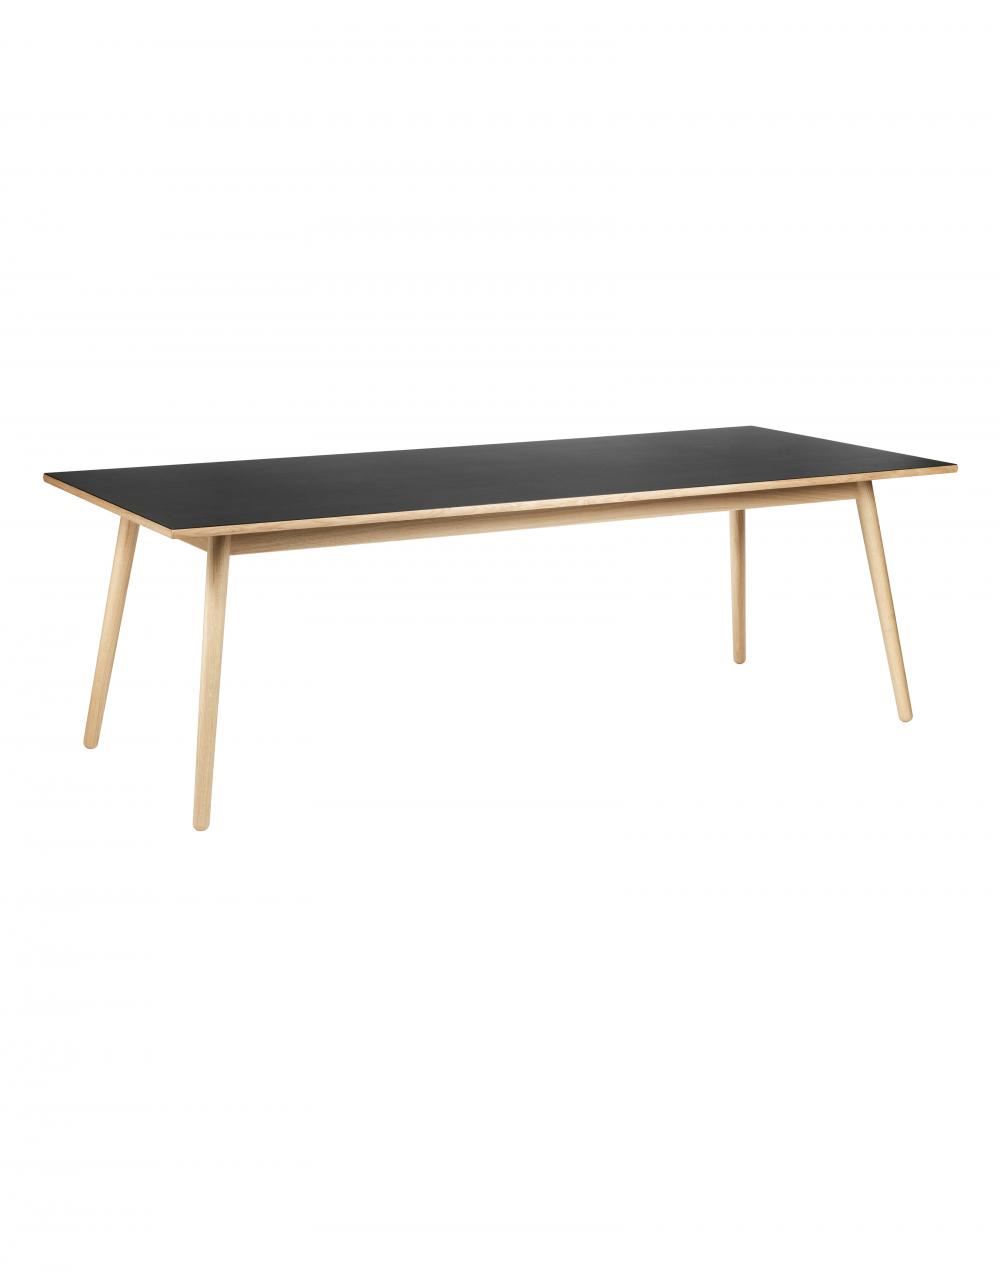 C35 Dining Table Large Beech With Black Lino Top Beech With Black Lino Top